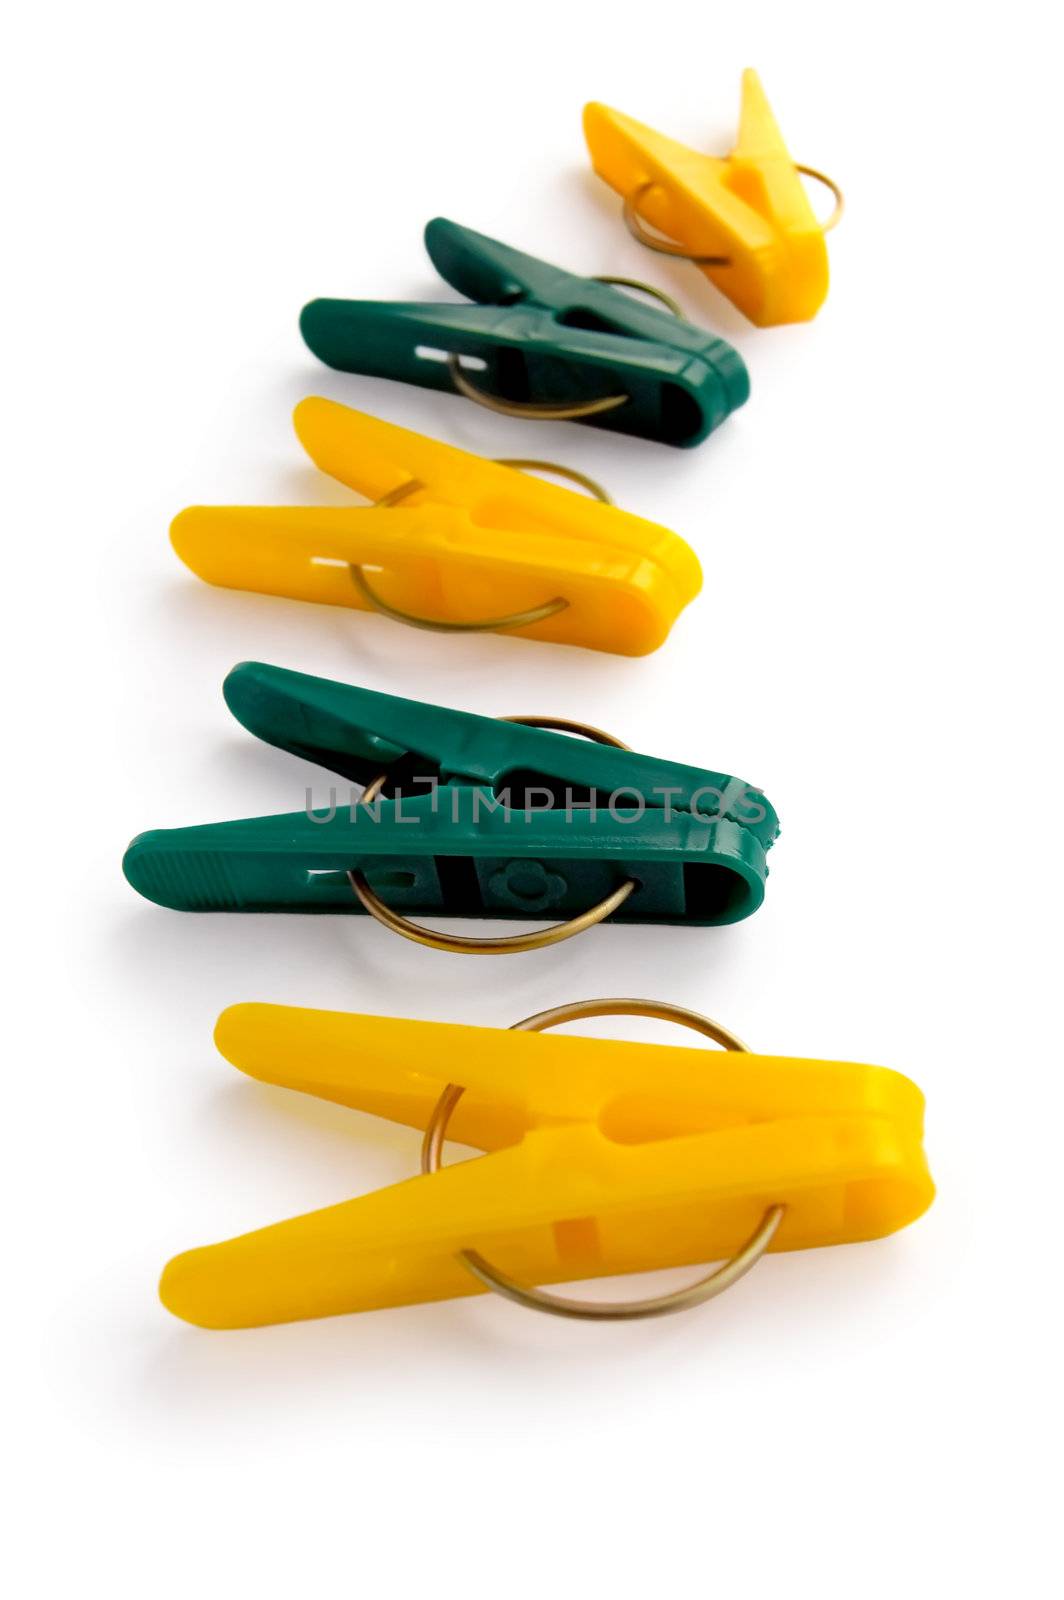 A number of yellow and green clothespins isolated on a white background